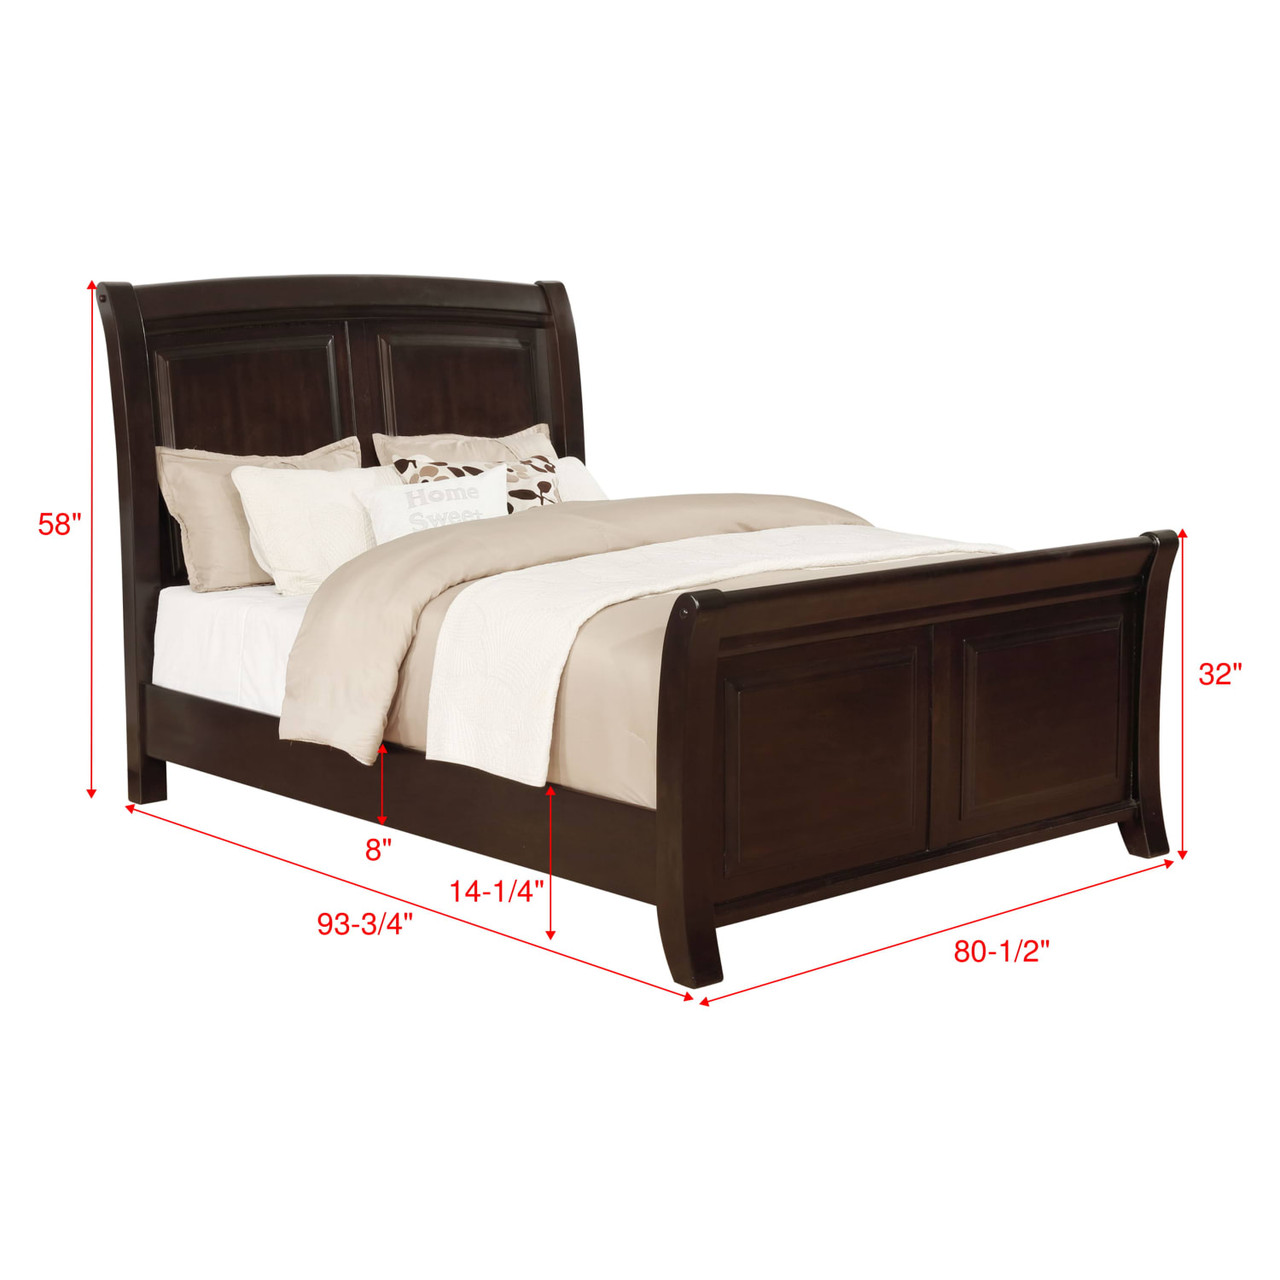 Keaton Collection King Bed